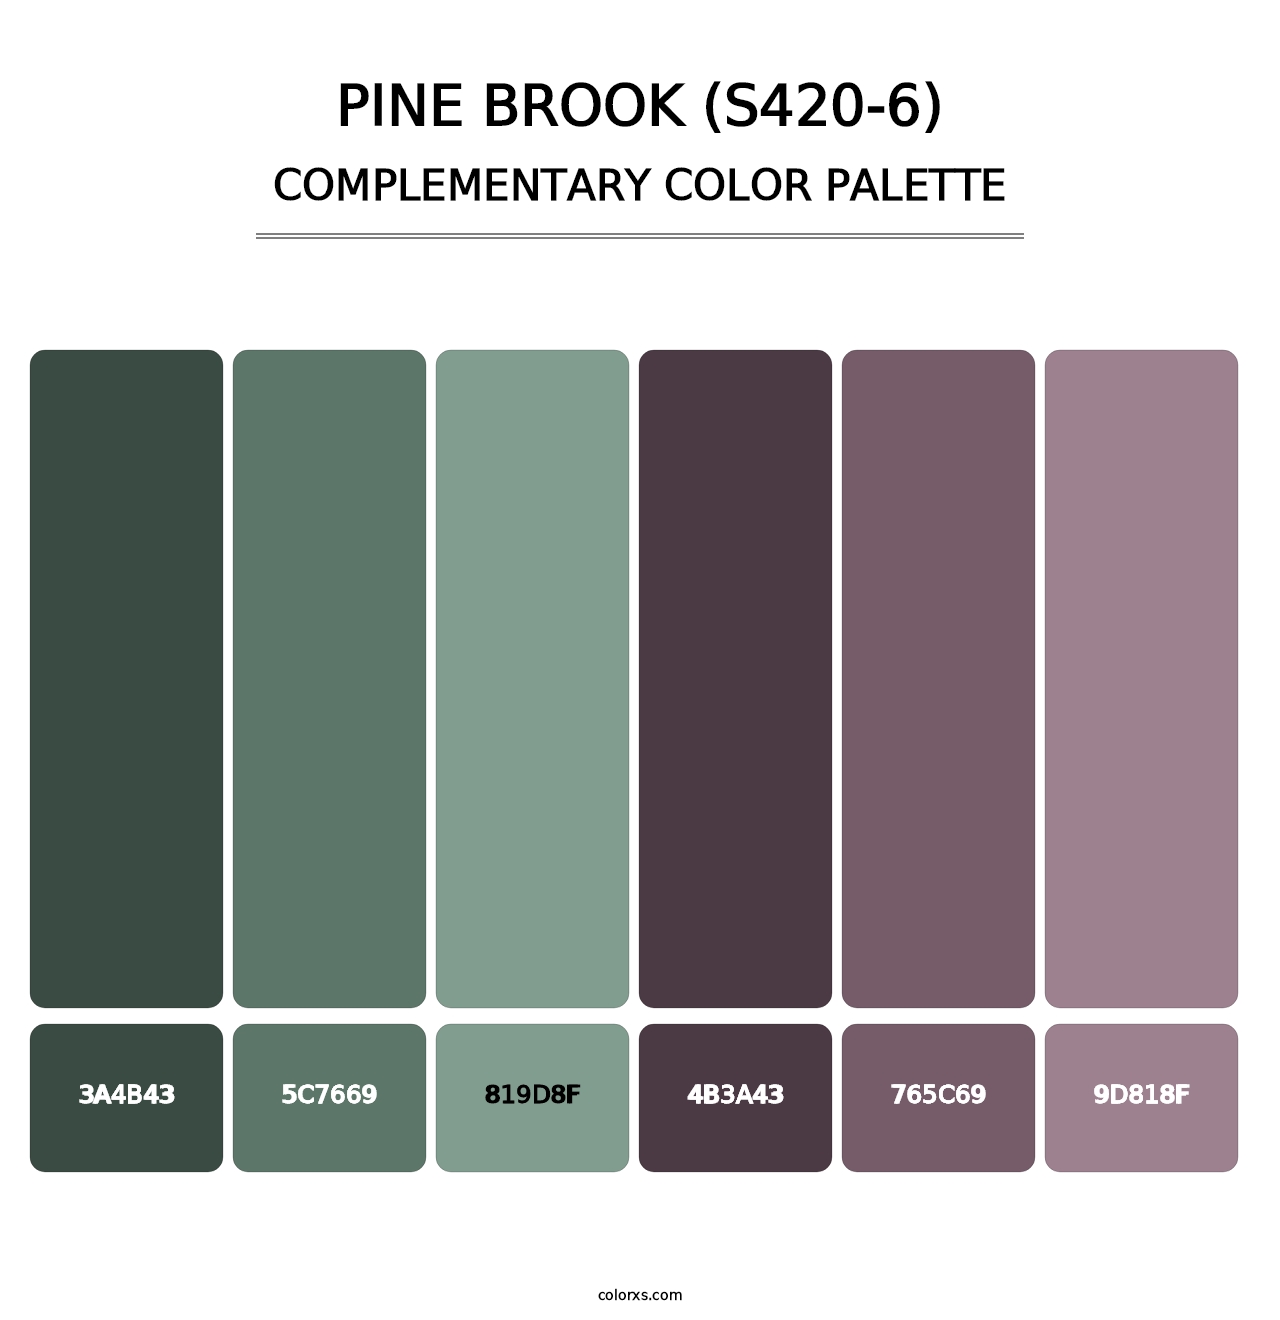 Pine Brook (S420-6) - Complementary Color Palette